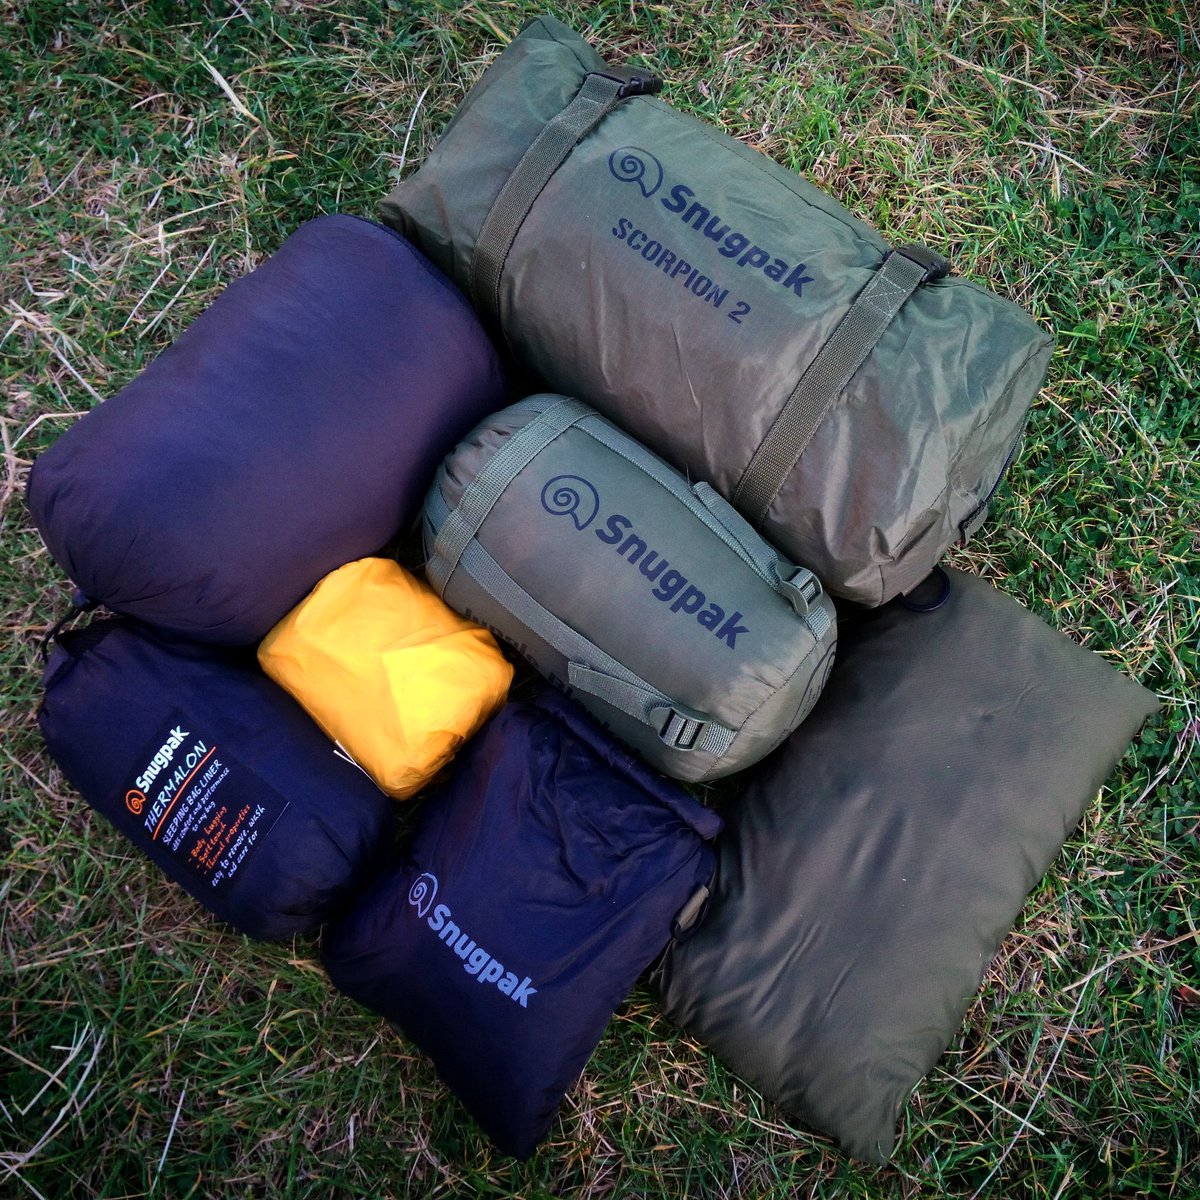 Hippyswift On Twitter My Camping Gear For Detectorval Snugpak Equipment Has Been My Go To Gear For A Few Years Now Never Lets Me Down Here Is My Kit List